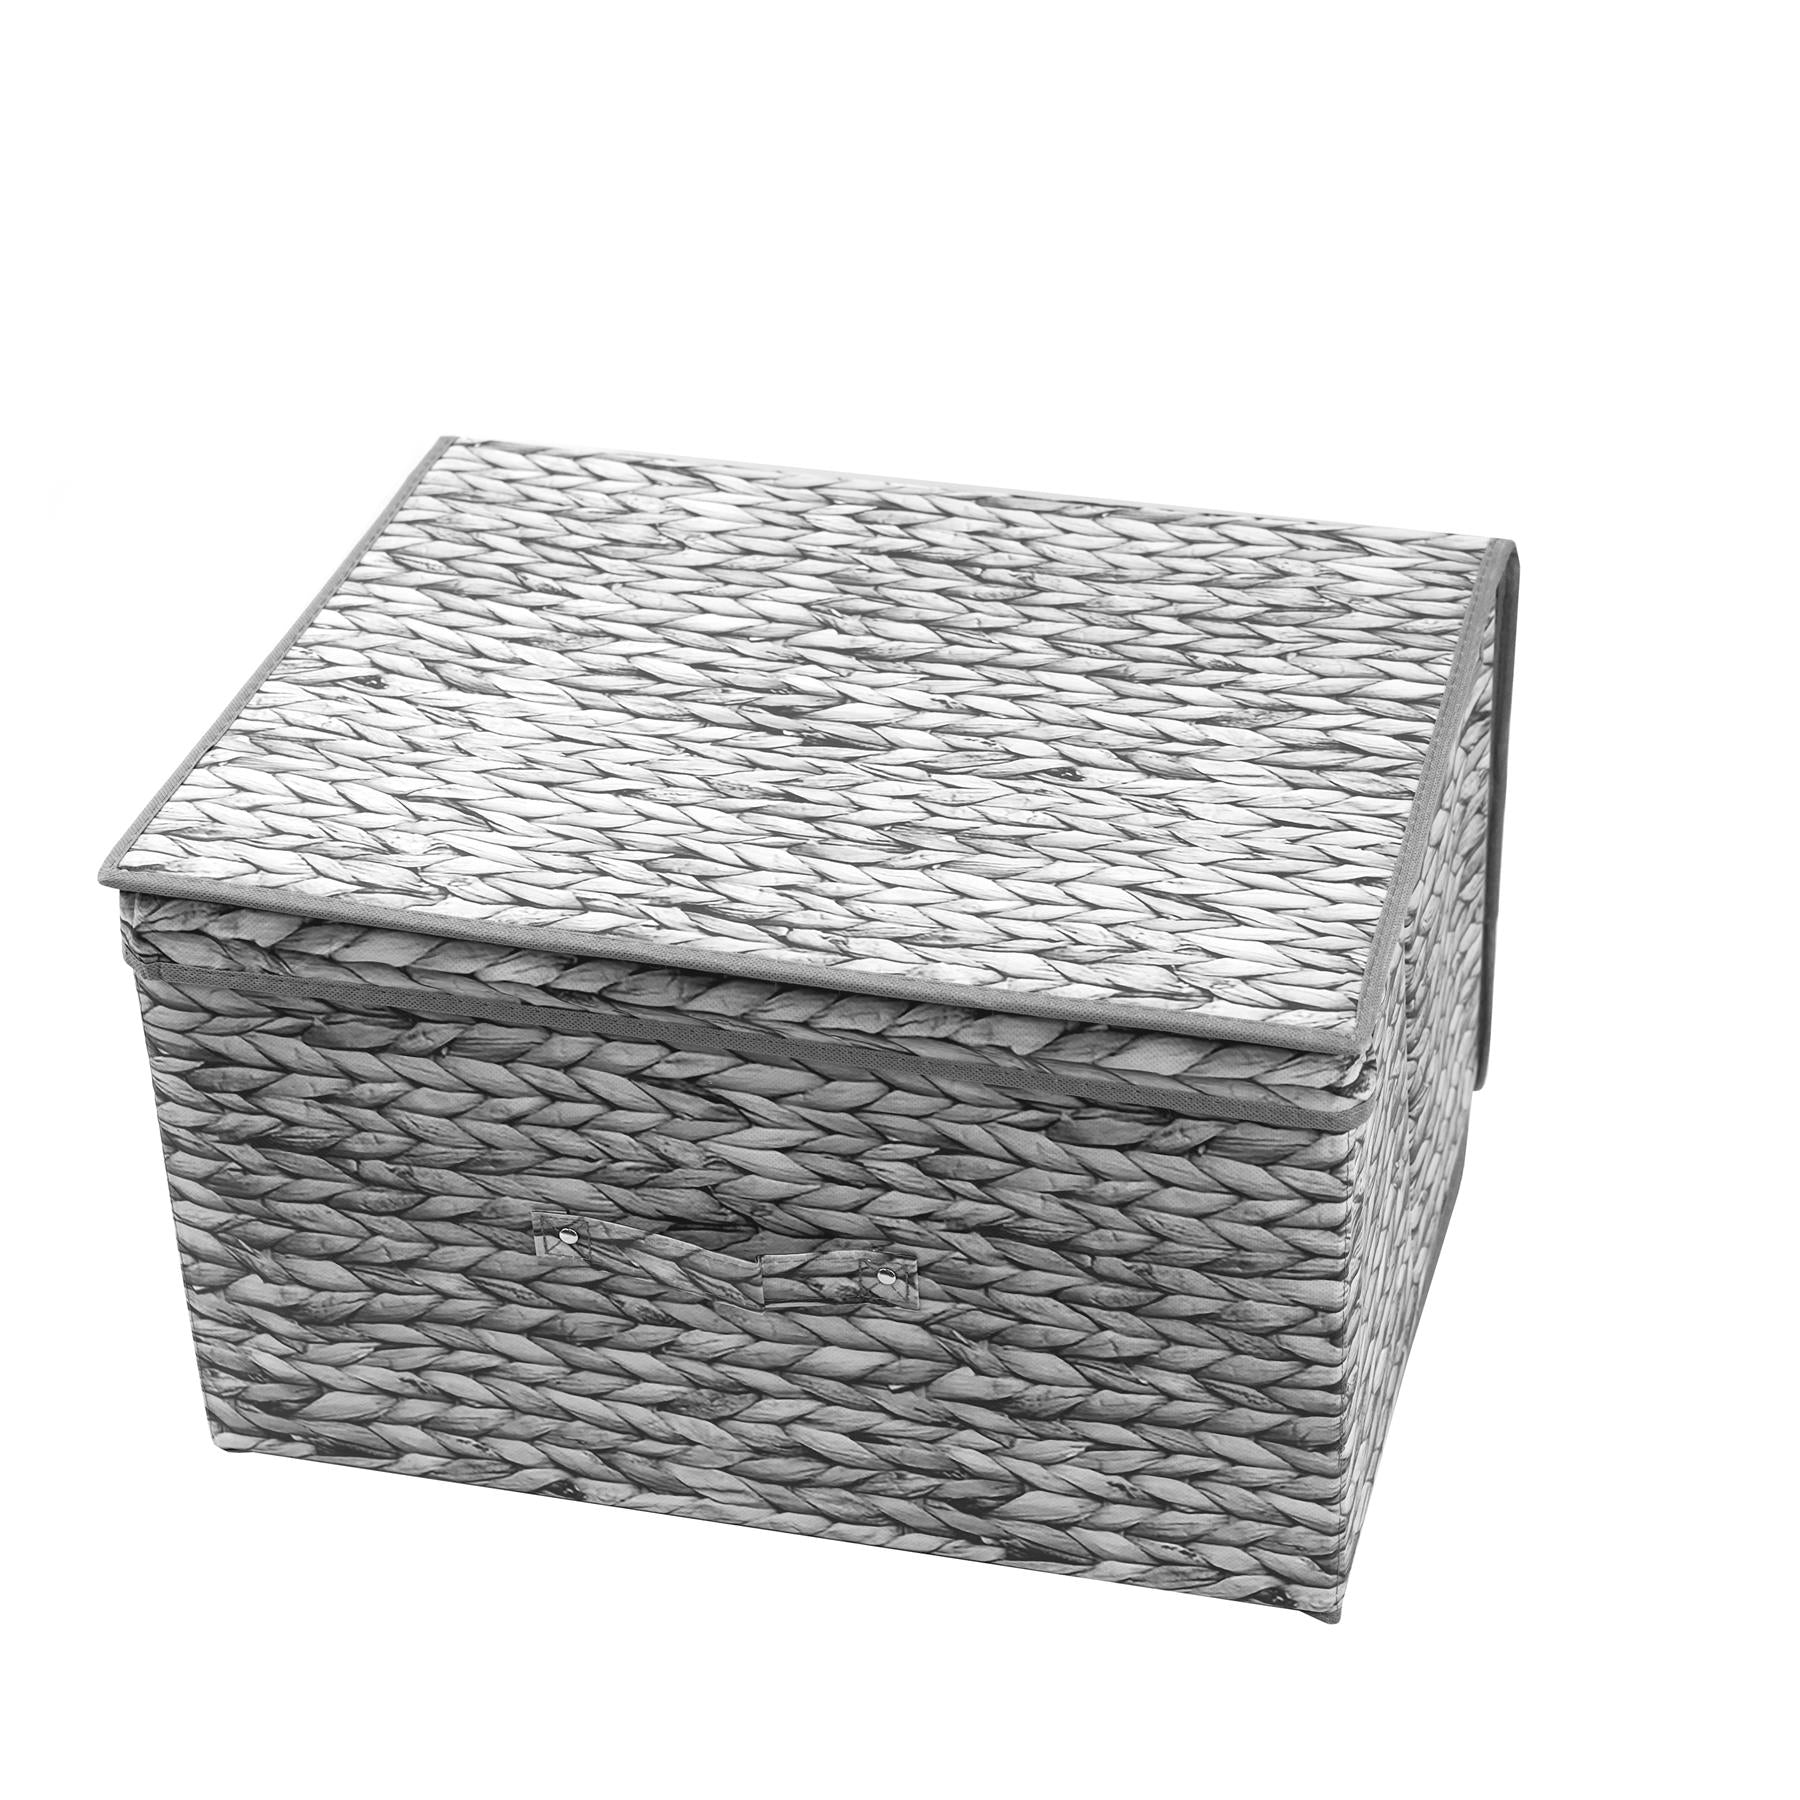 Weave Grey Storage Box by The Magic Toy Shop - The Magic Toy Shop